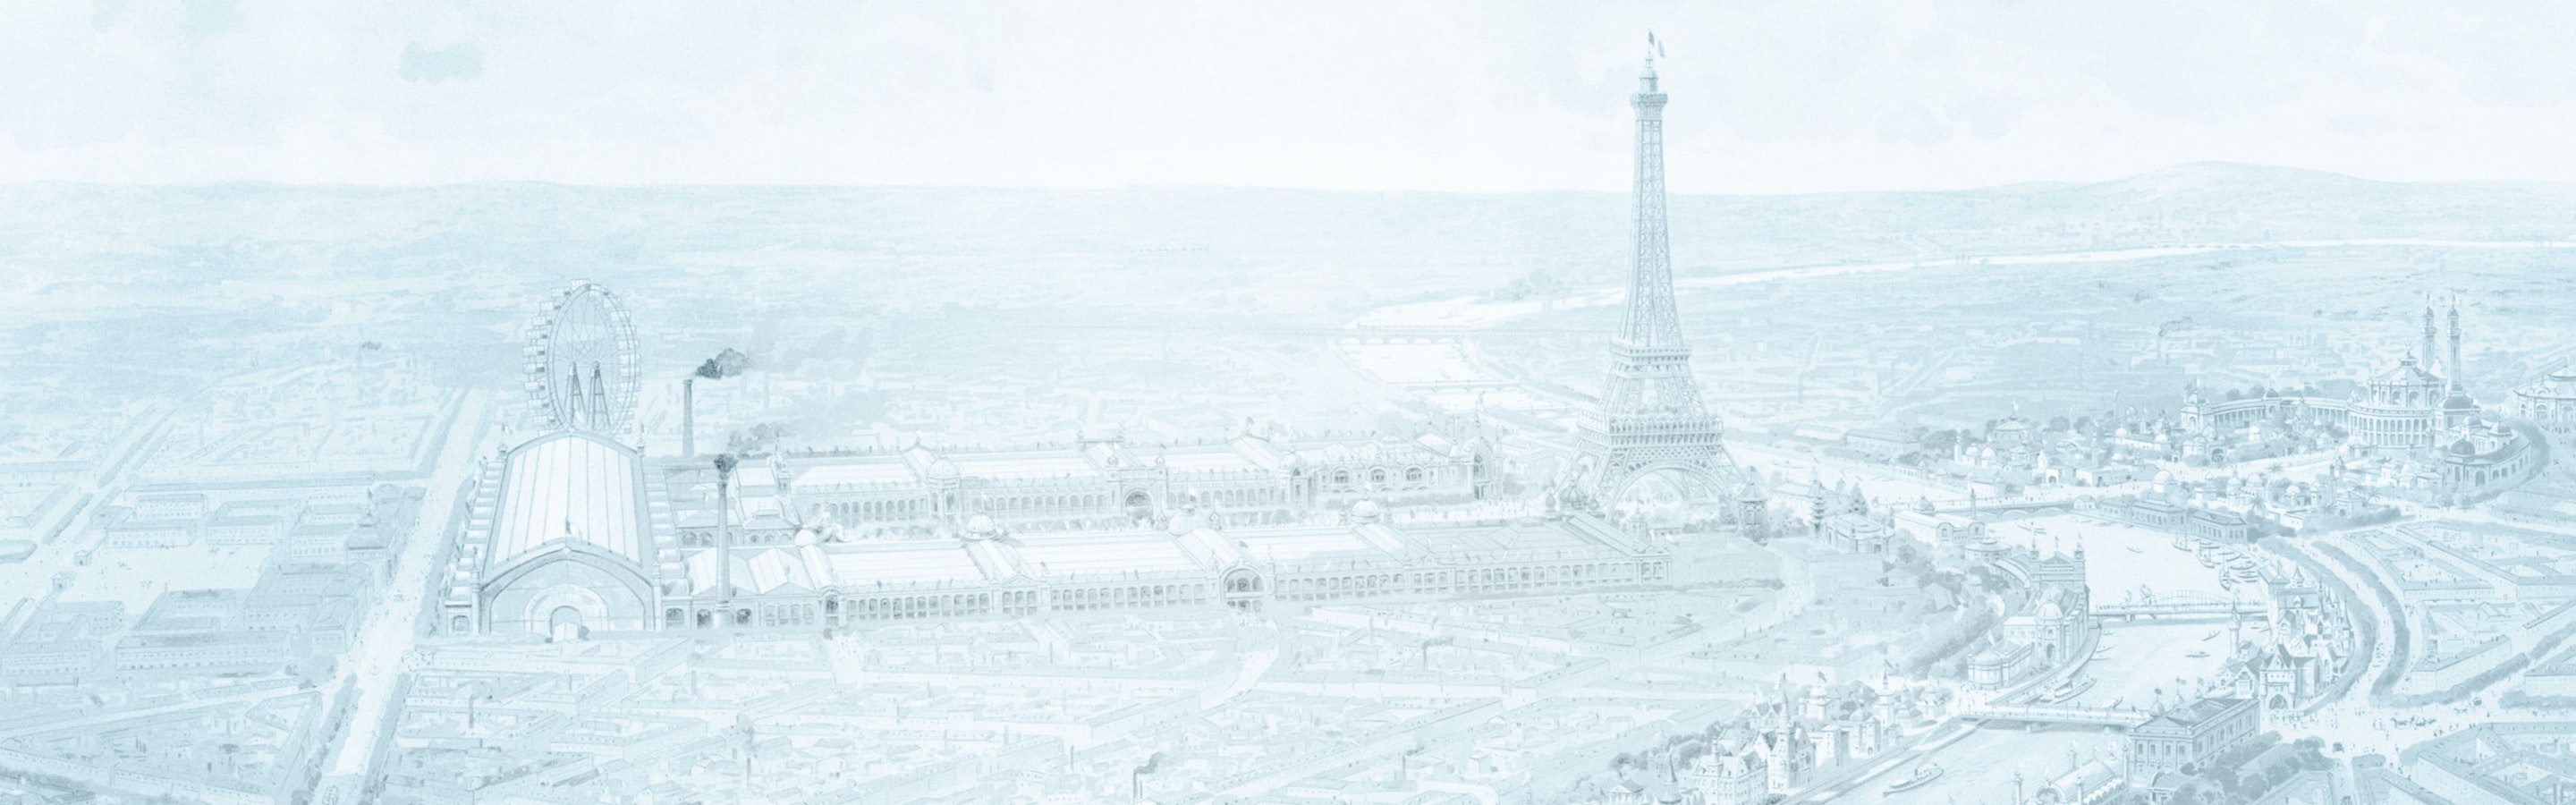 A sketch of Paris and the Eiffel Tower from an aerial view.